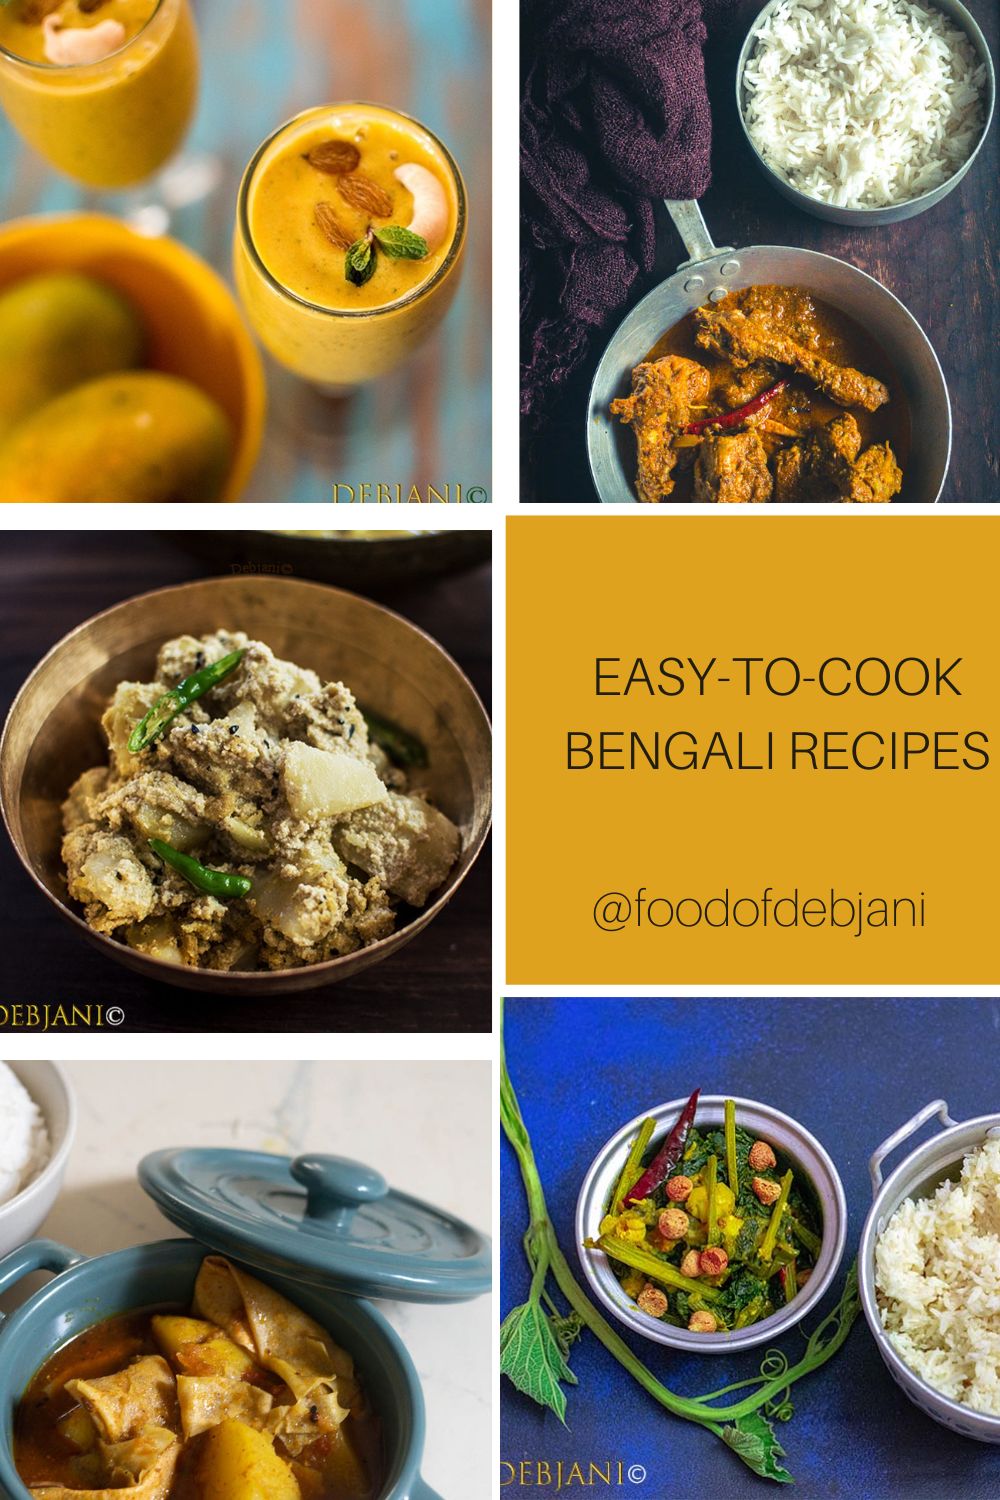 %Easy-to-Cook Bengali Recipes Pinterest Pin